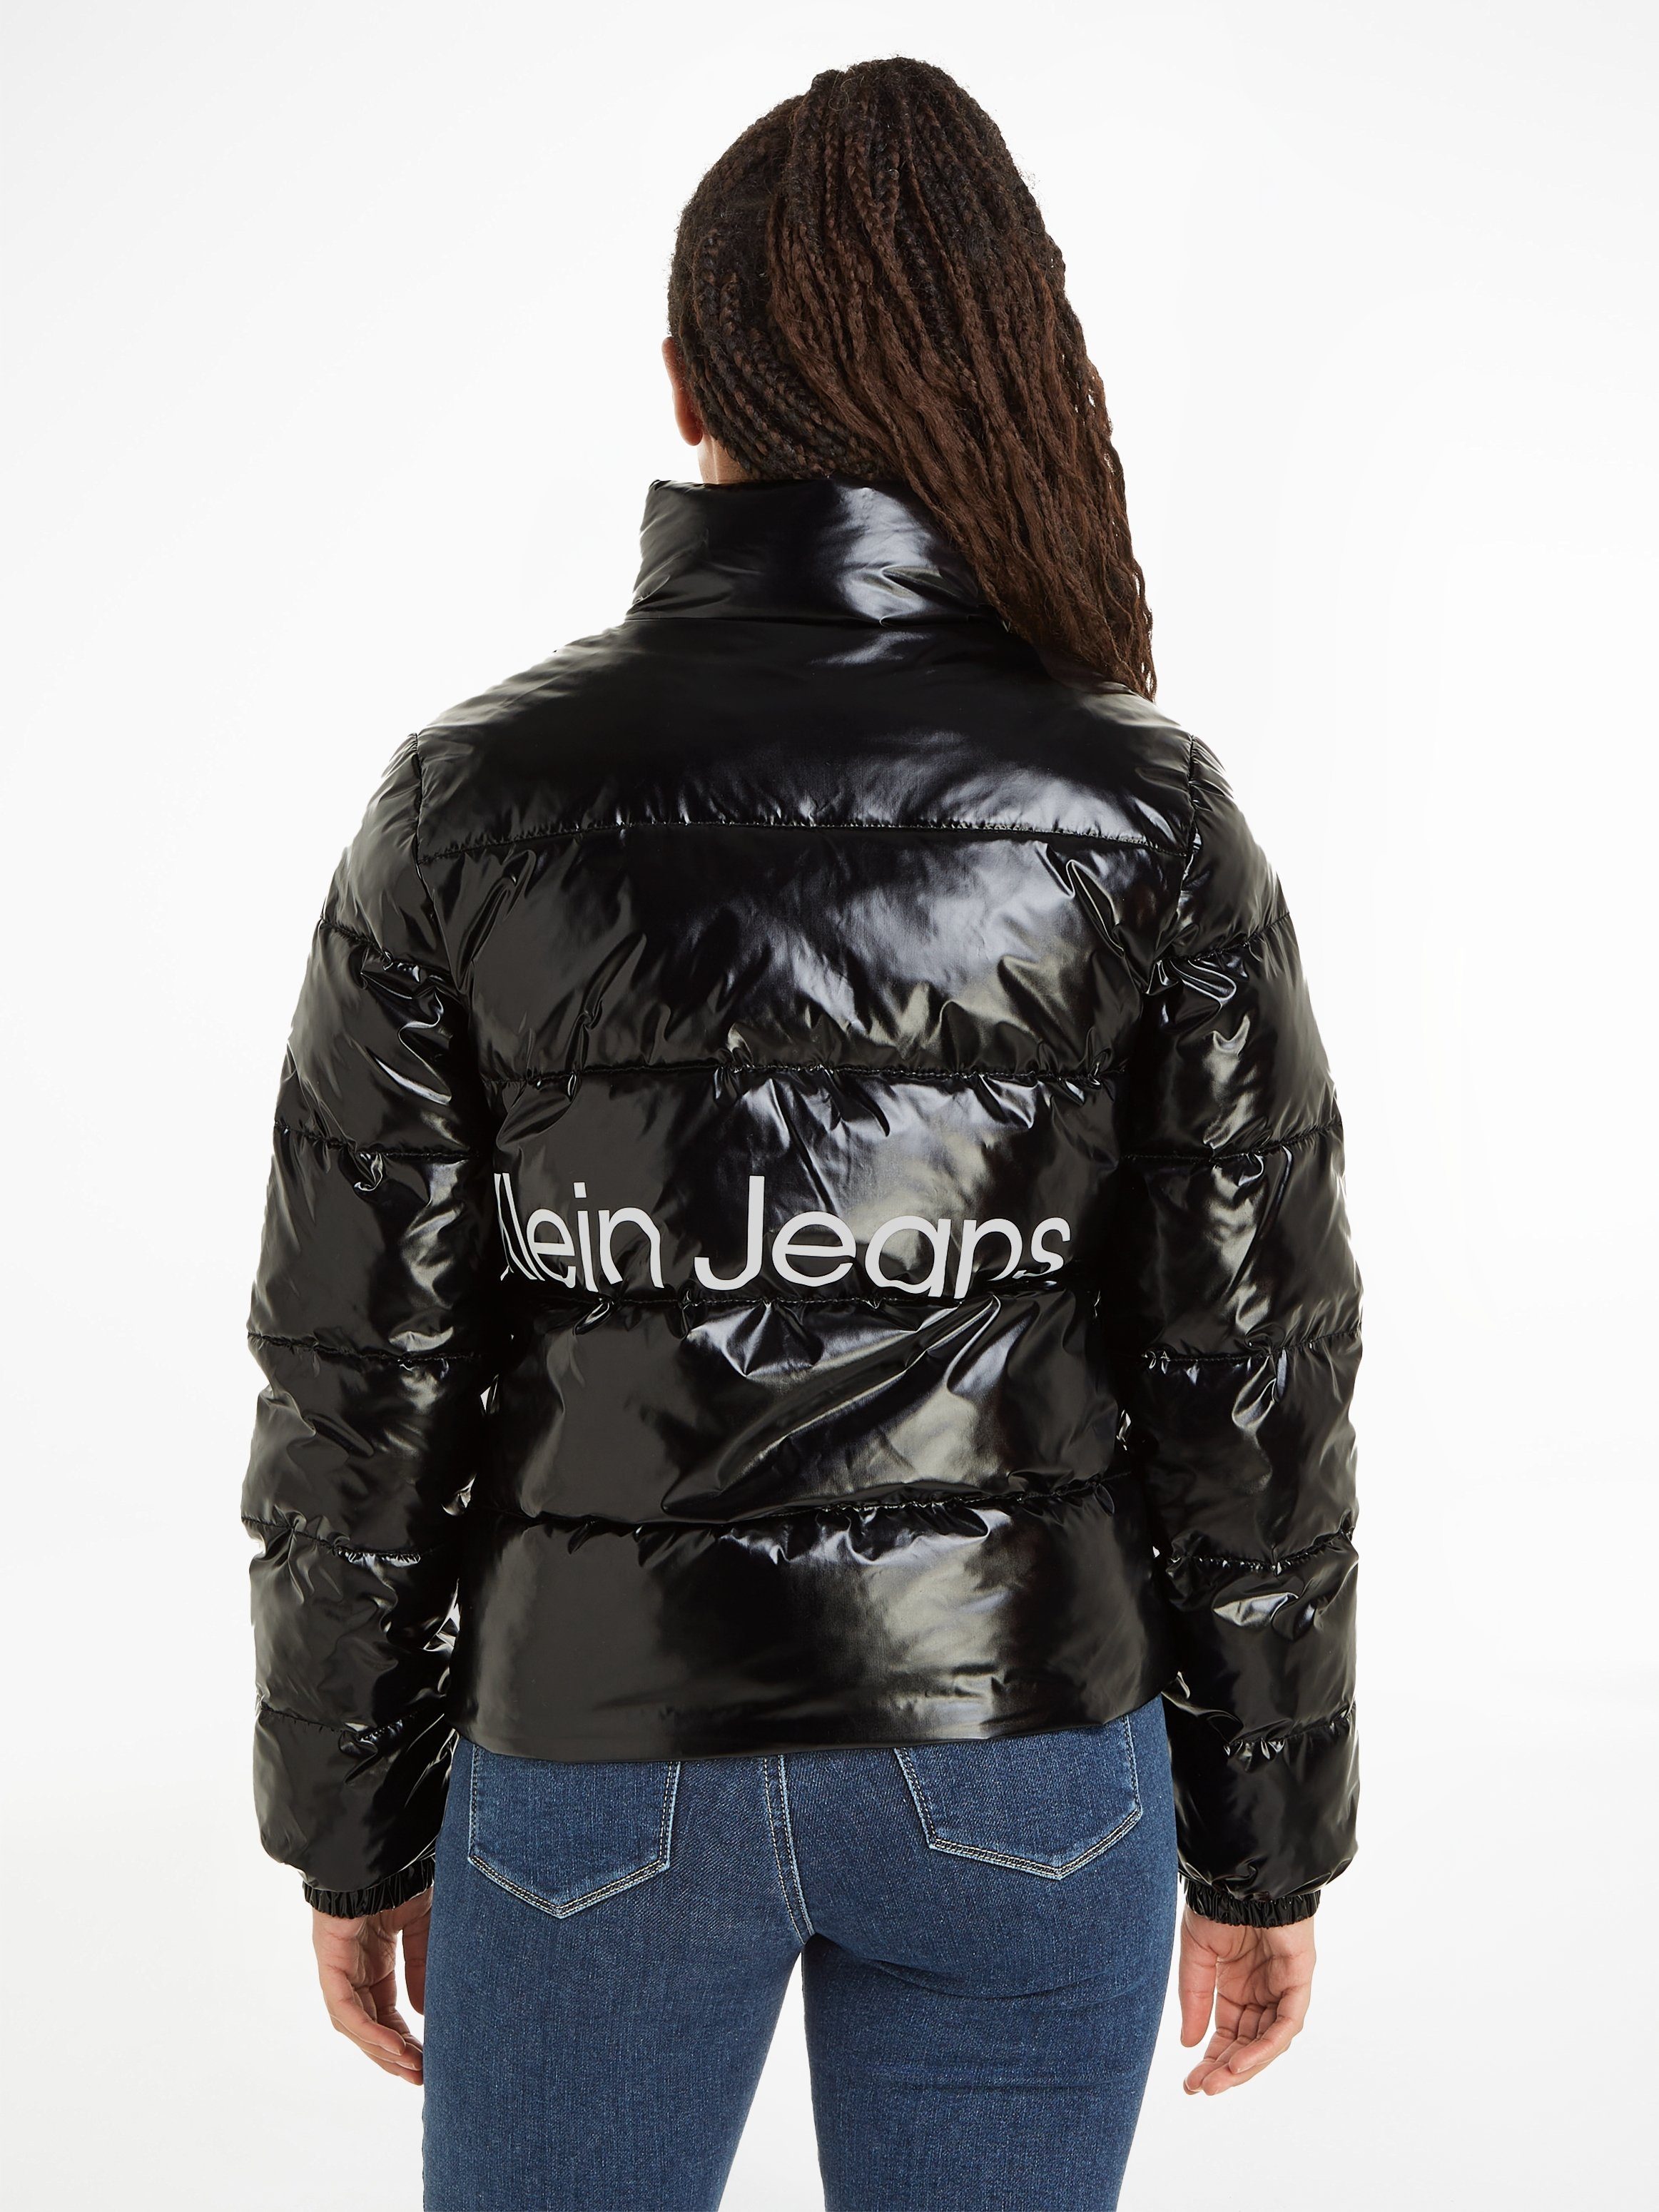 FITTED Jeans SHORT Steppjacke JACKET Klein SHINY Calvin